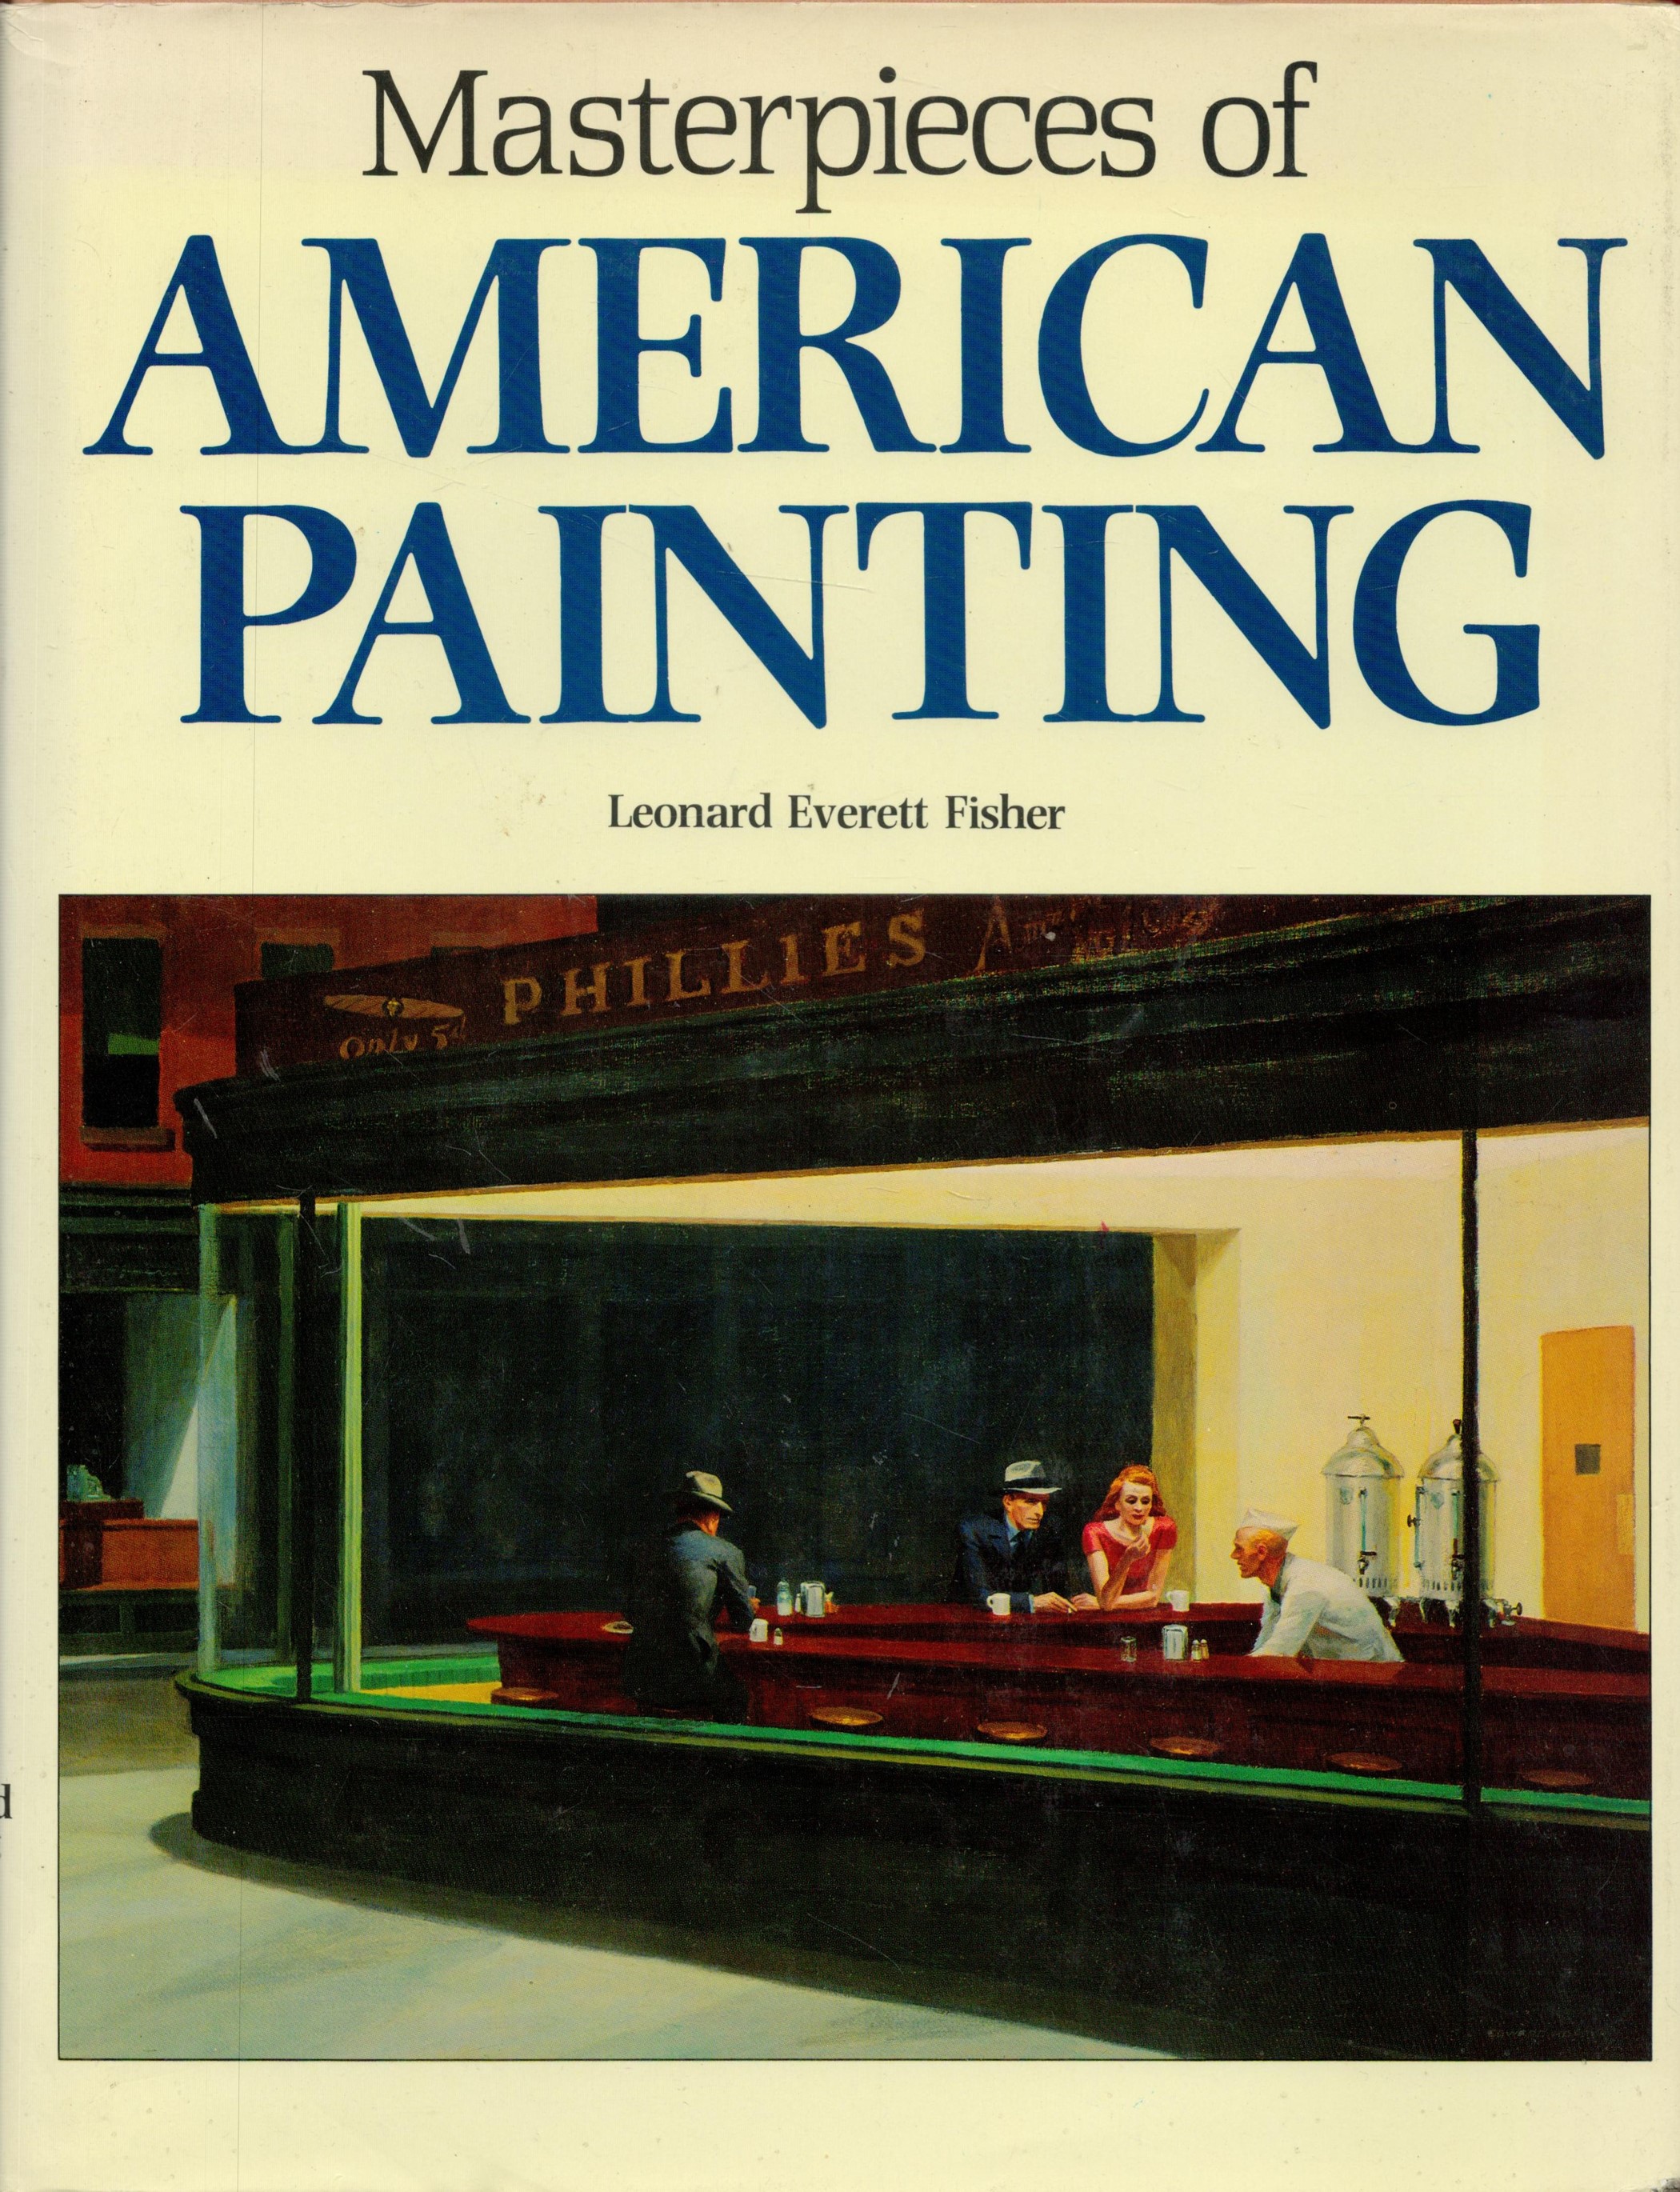 Masterpieces of American Painting by Leonard Everett Fisher 1985 First Edition Hardback Book with